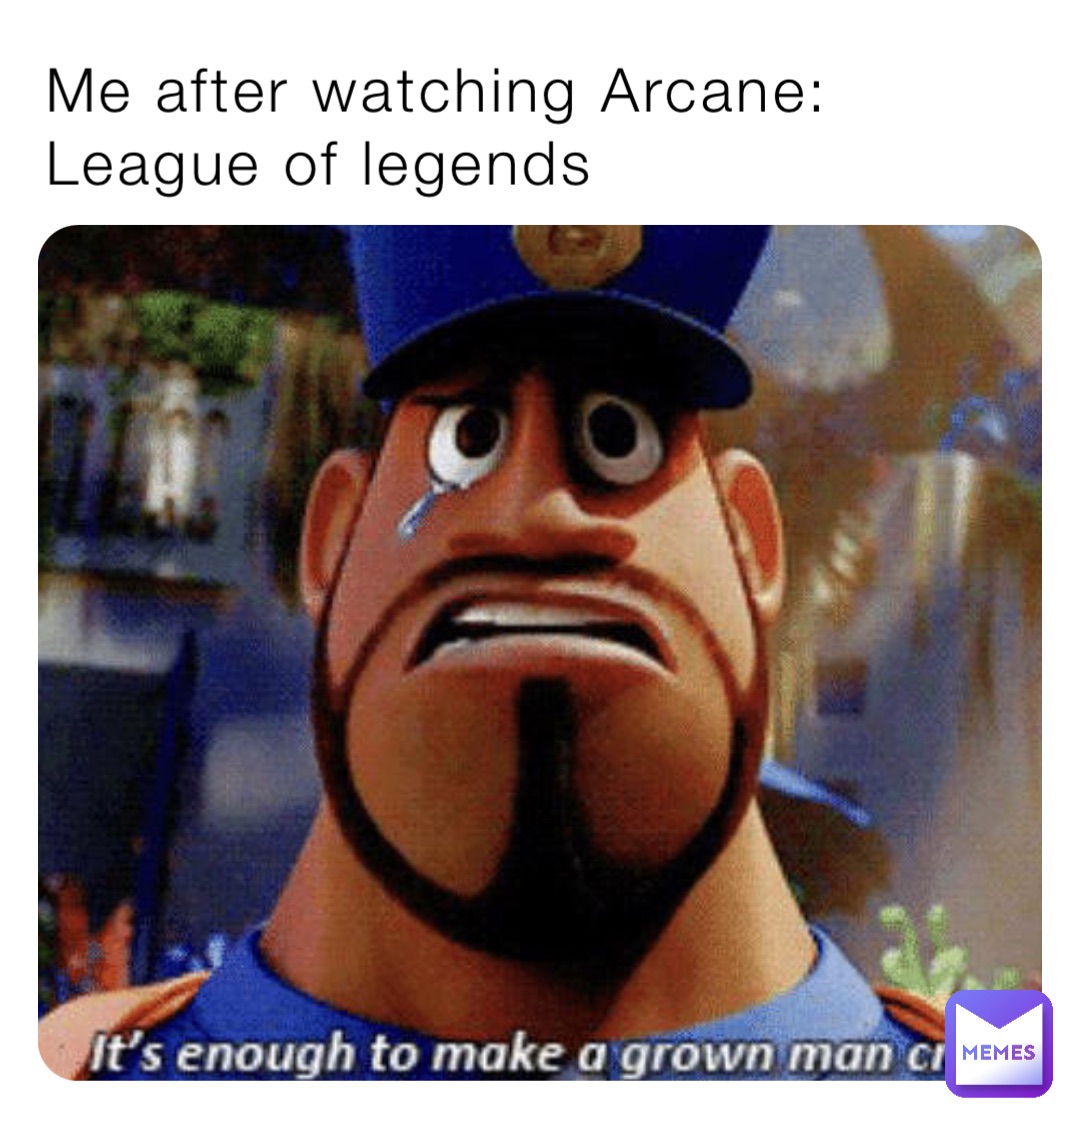 Me after watching Arcane: League of legends